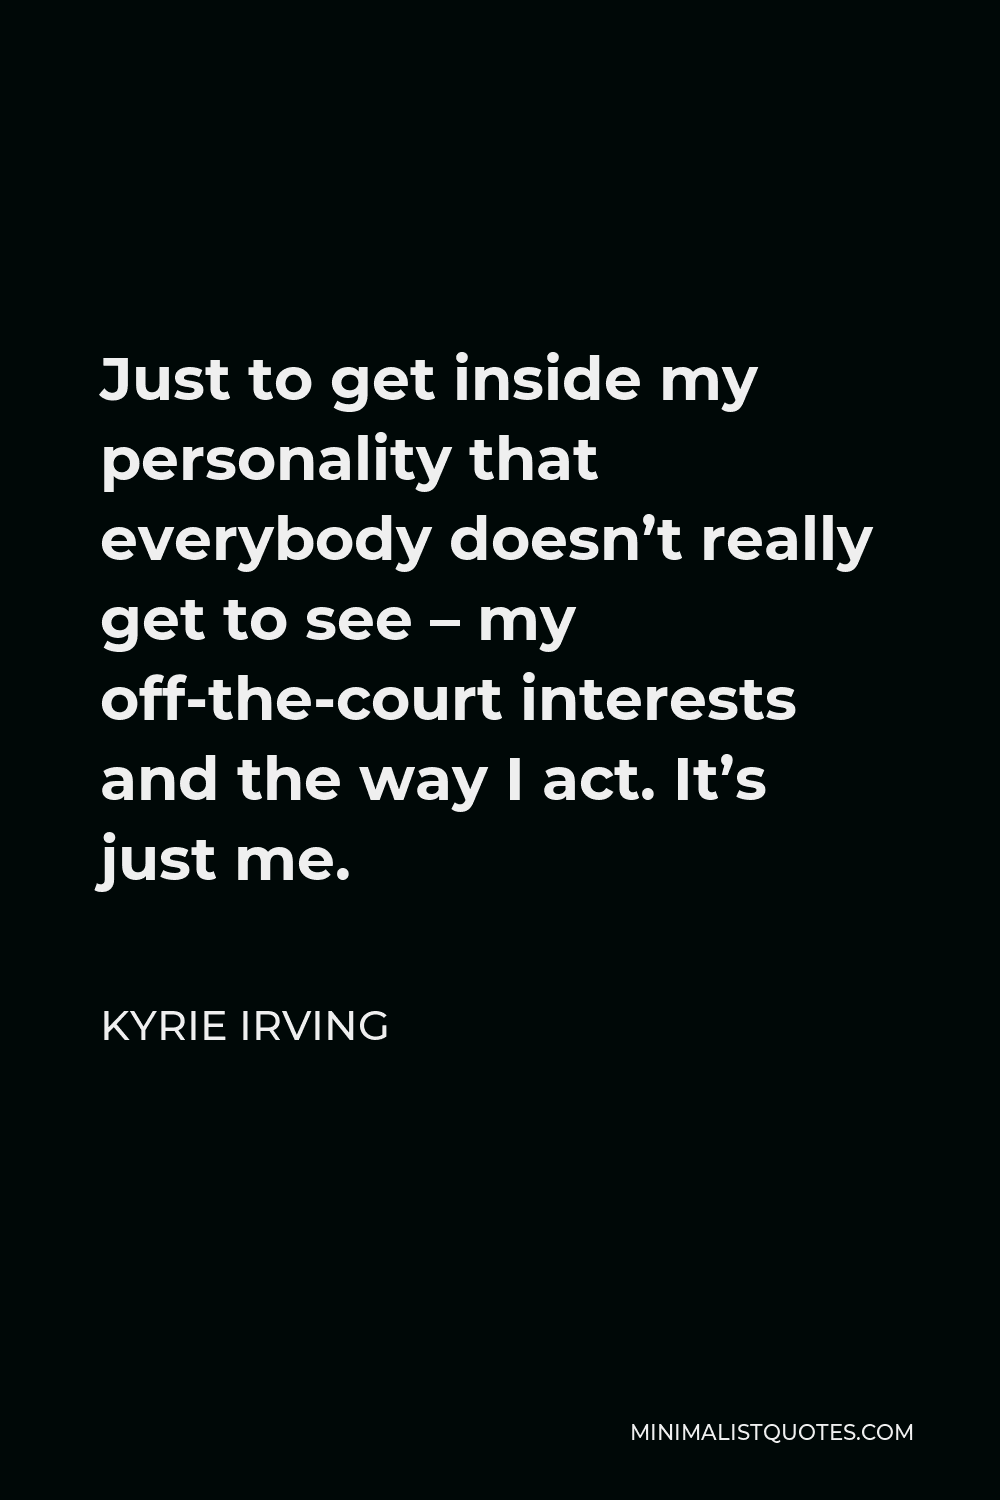 Kyrie Irving Quote - Just to get inside my personality that everybody doesn’t really get to see – my off-the-court interests and the way I act. It’s just me.